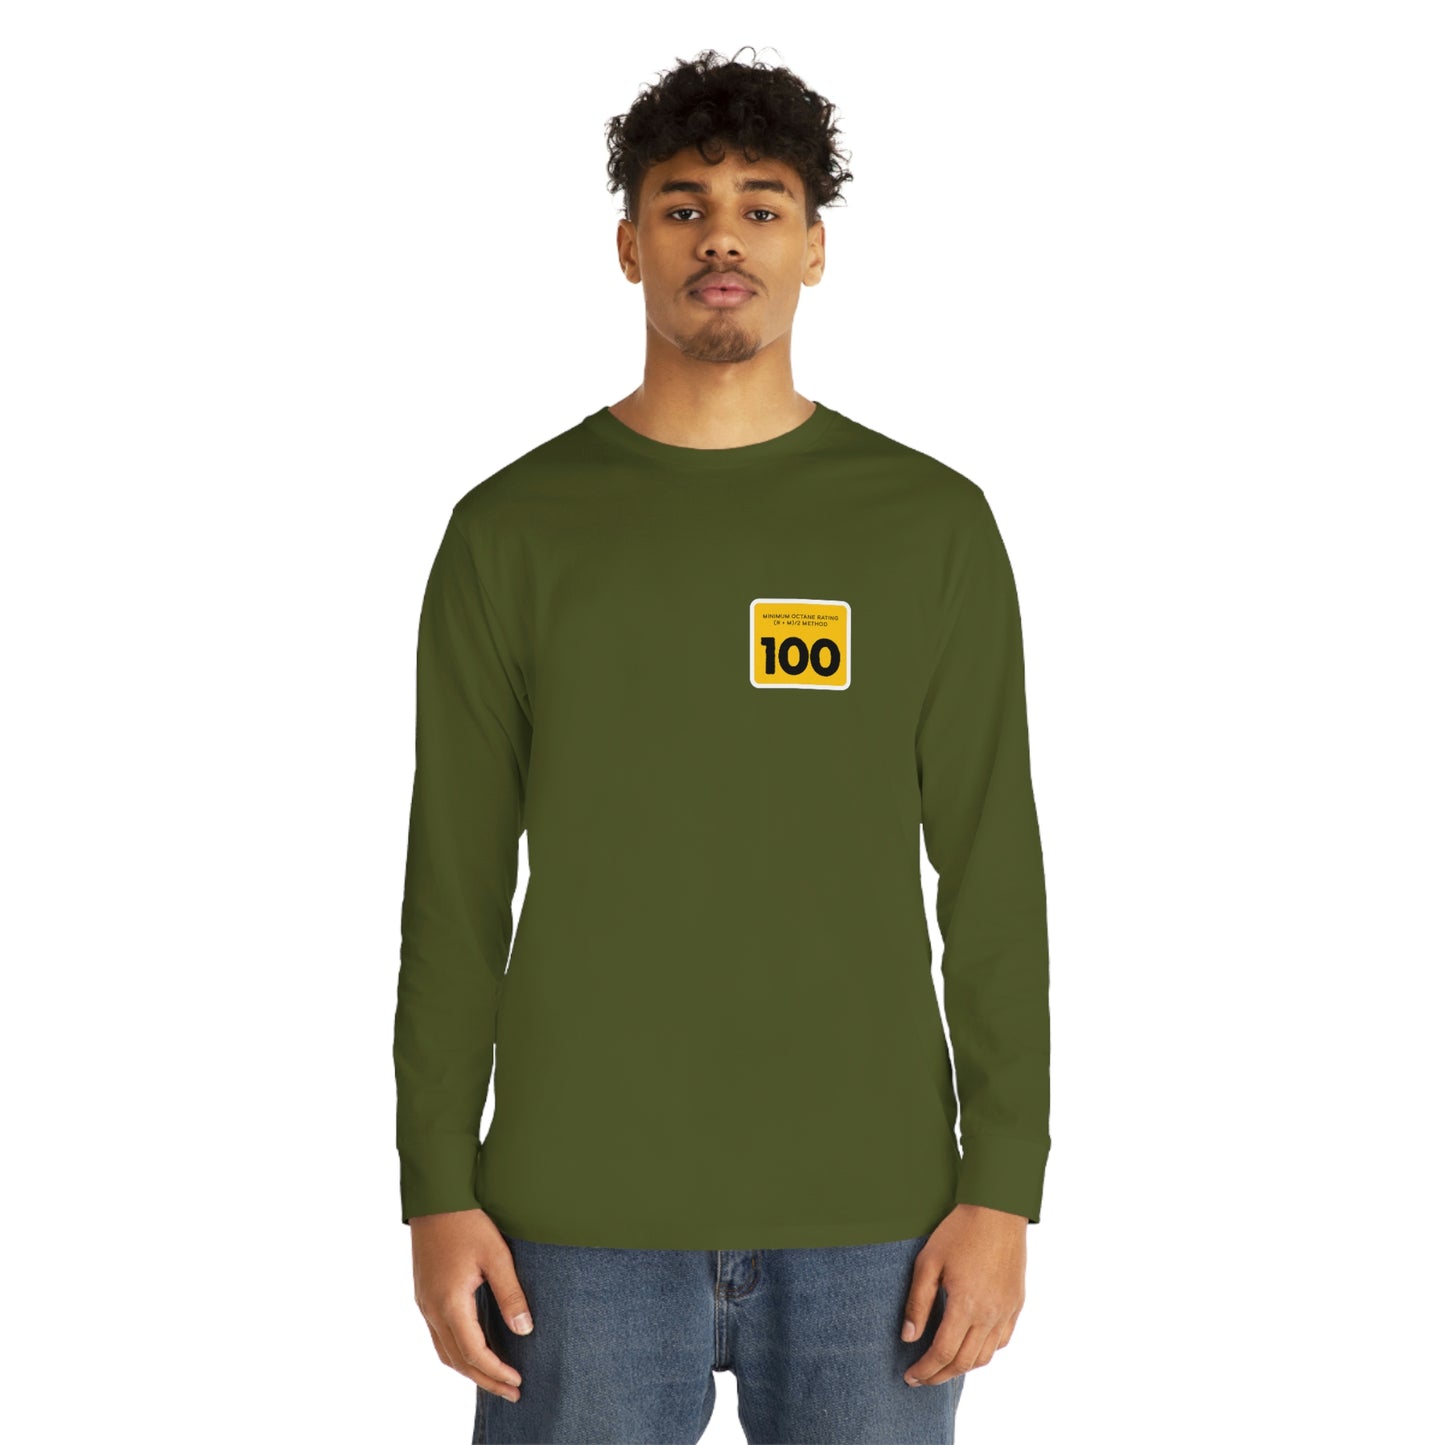 Come And Take It 100 Octane Gas Pump Long Sleeve Crewneck Tee with Design On Back